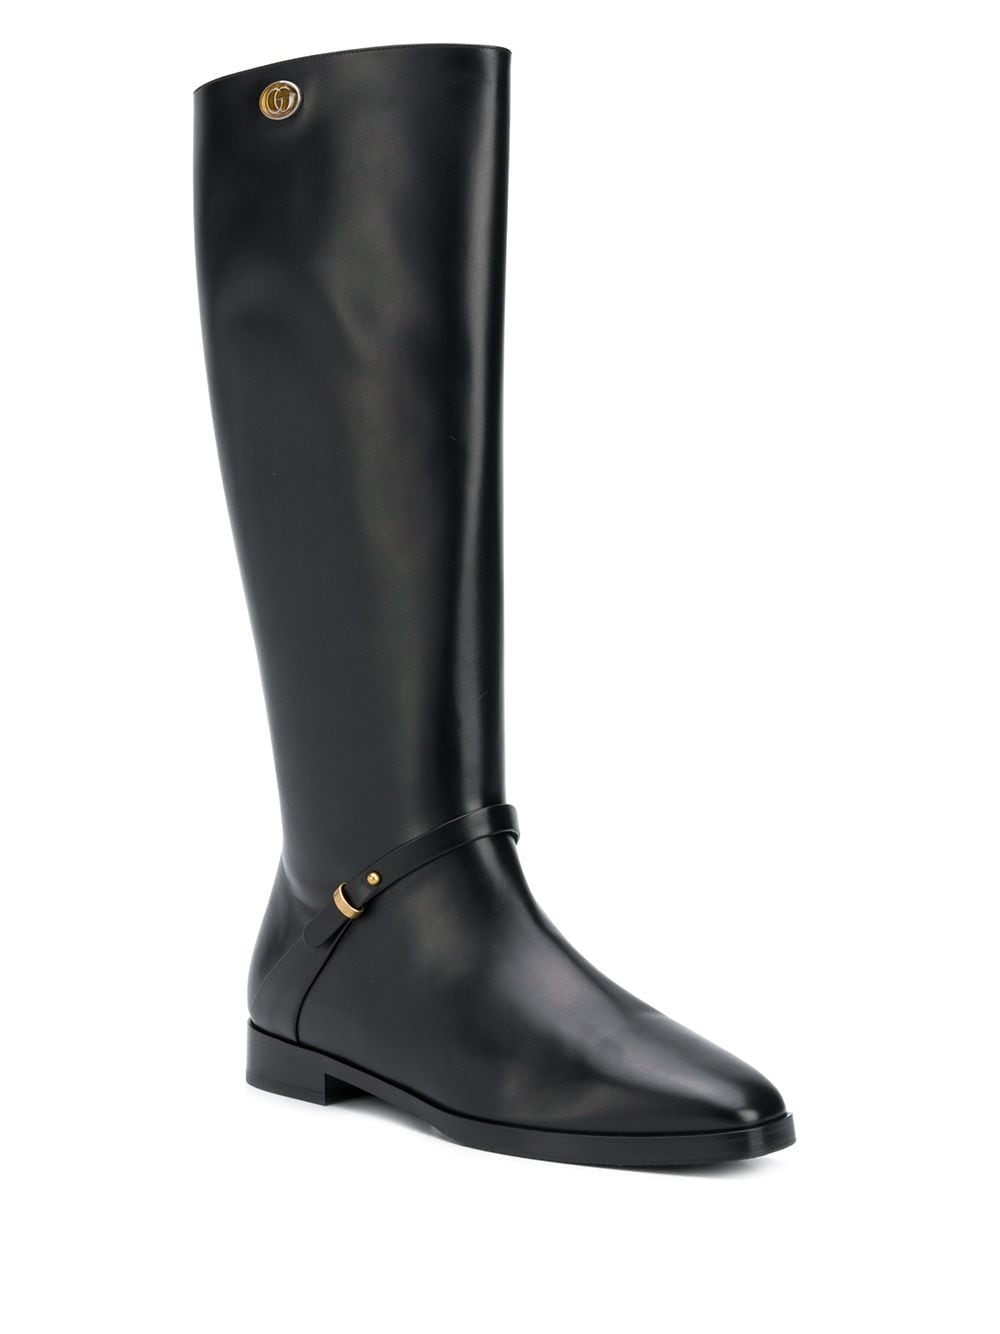 Gucci calf-length Leather Boots - Farfetch